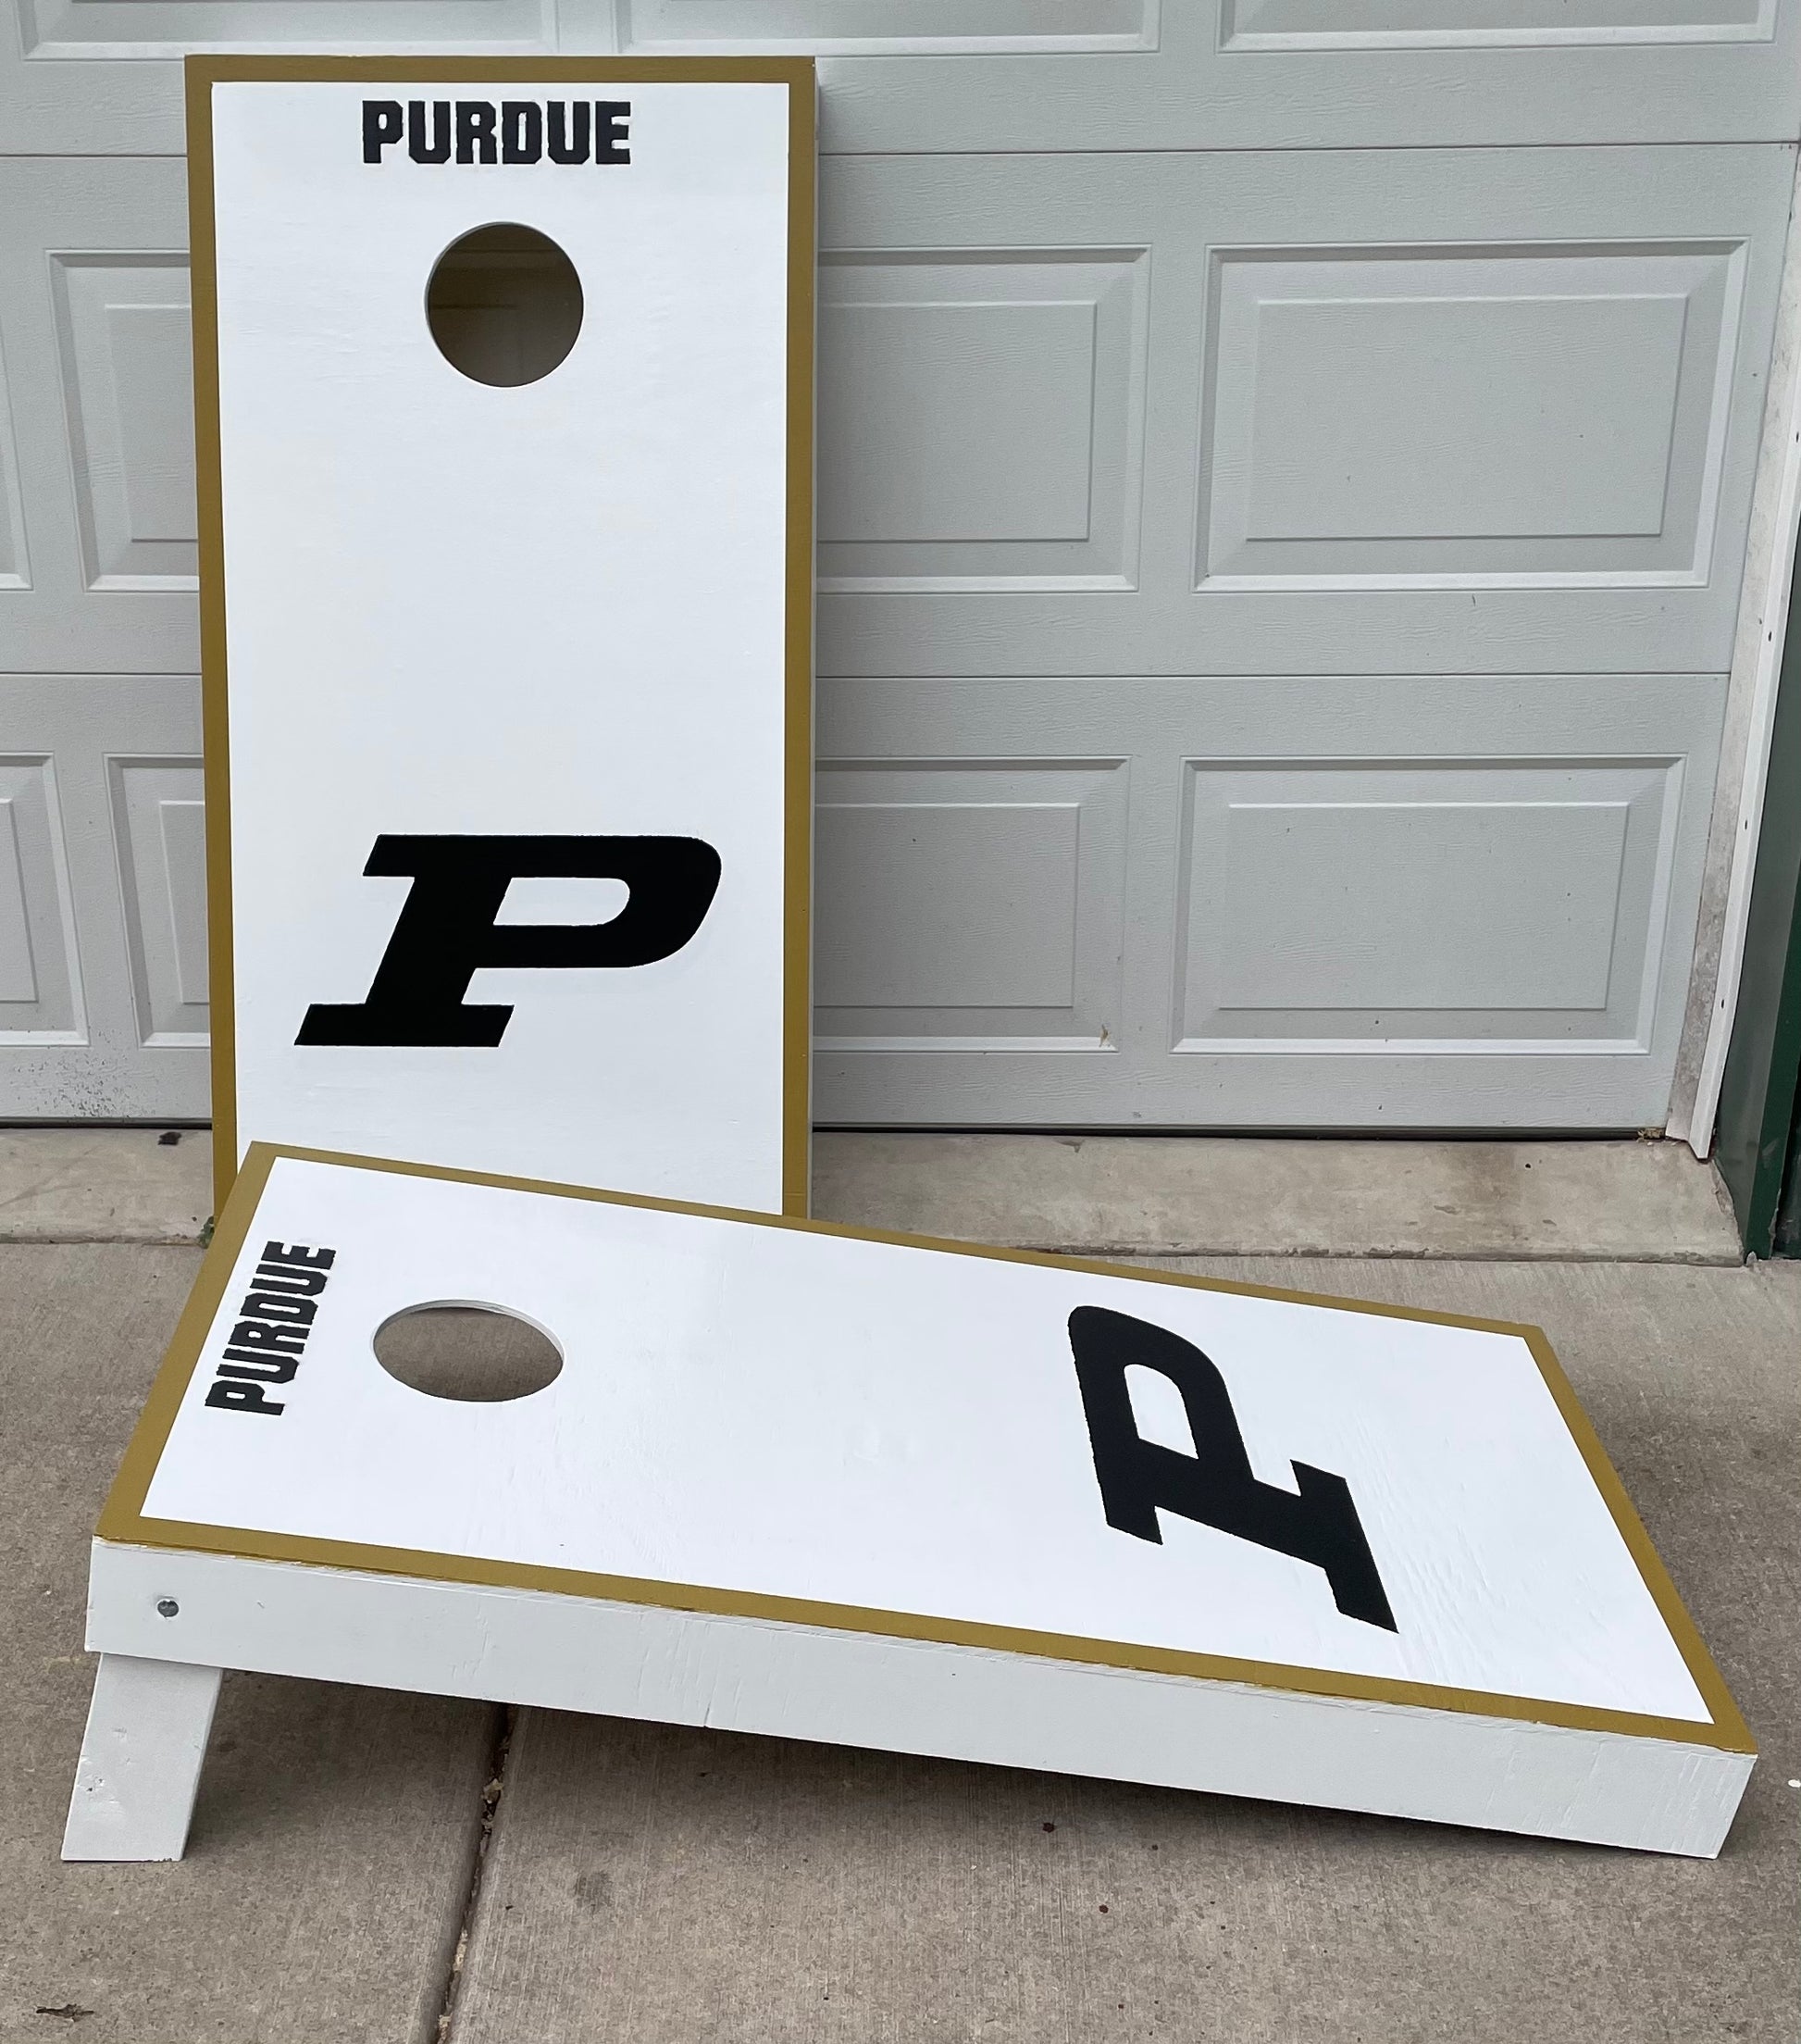 -You get 2 boards (2ft X 4ft) with folding legs. Boards are made from 1/2" Plywood & legs are made from premium 2x4.  -Hole is cut out & sanded for a smooth opening.  -Set is coated with an exterior grade Polyurethane for lasting protection.  -This set is official size set.  -Quality set to last you years of FUN!